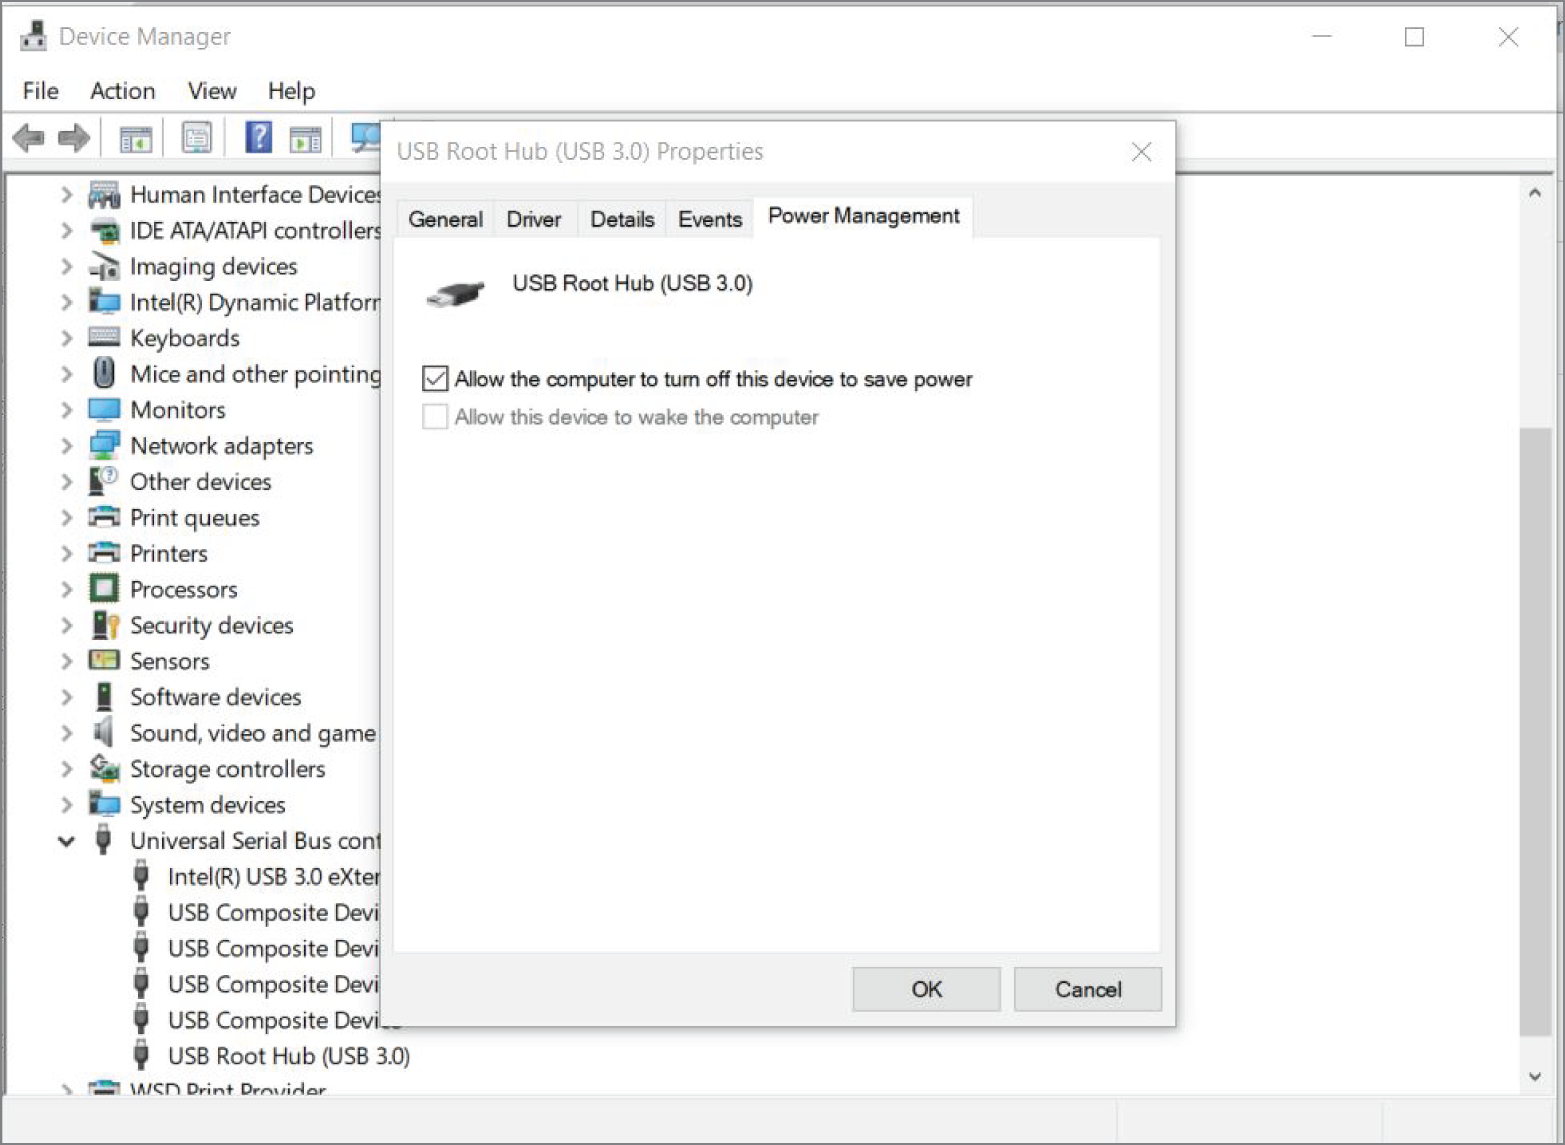 Snapshot shows the Device manager window.